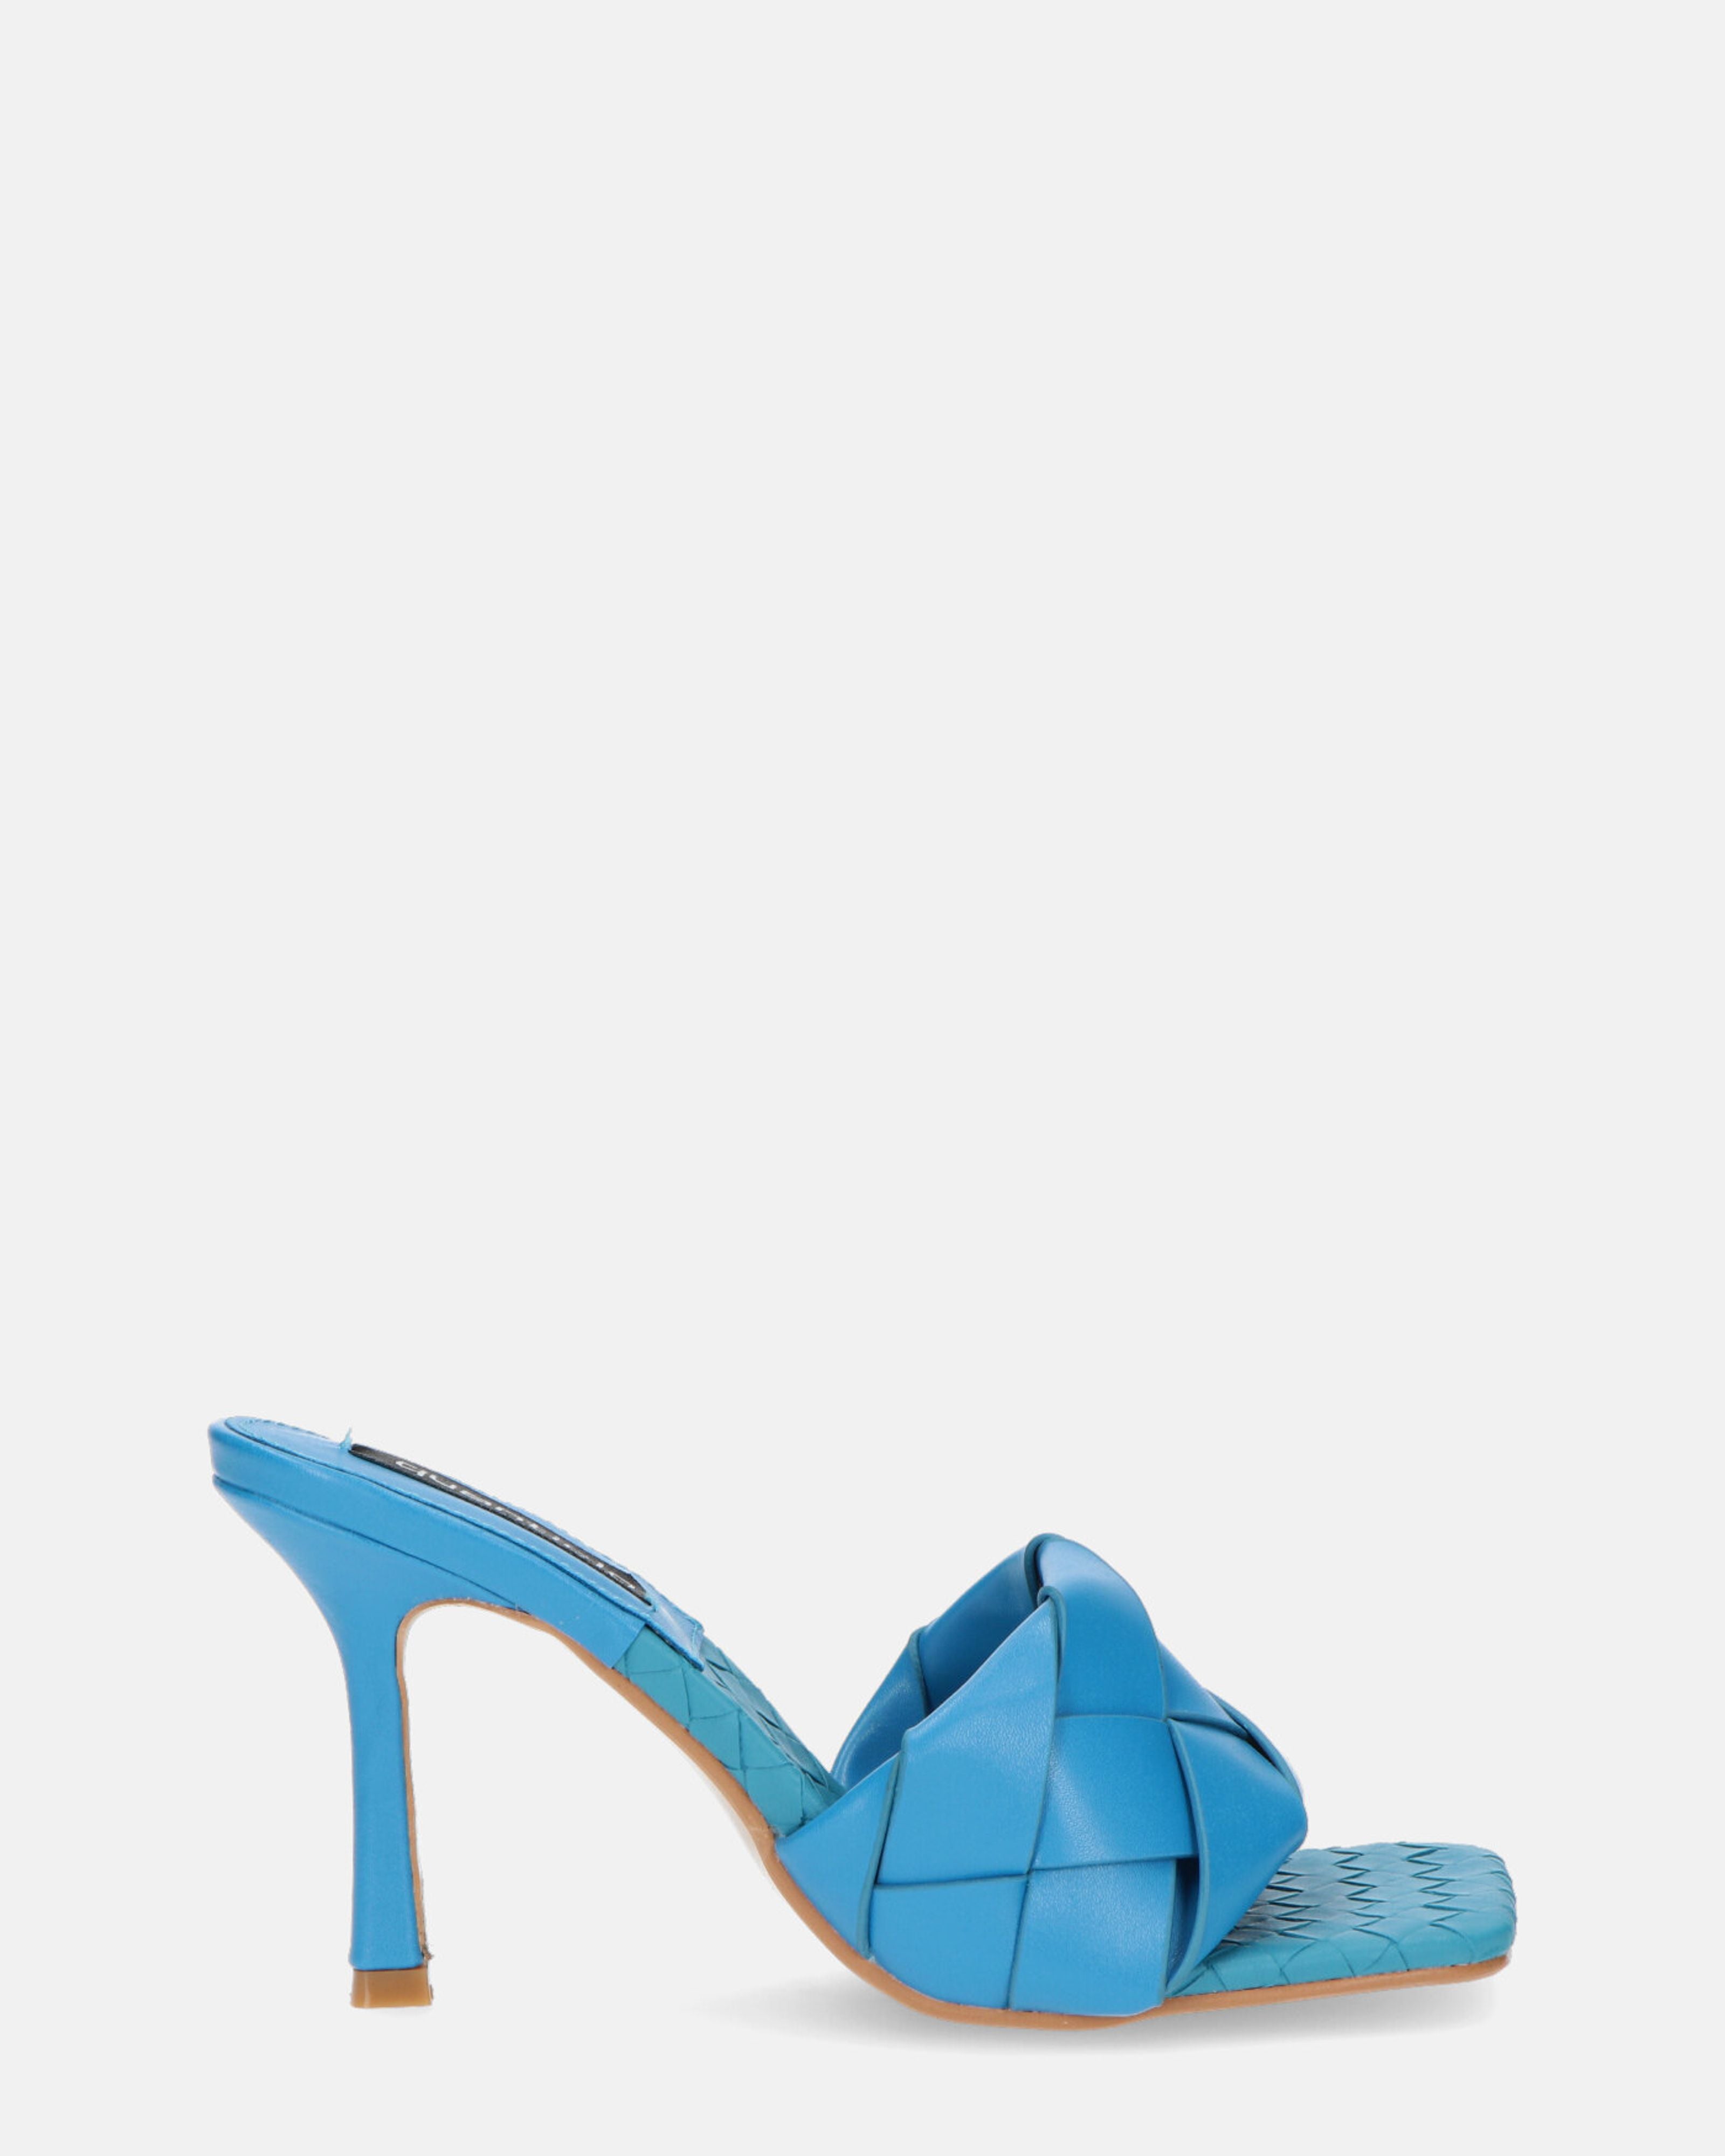 ENRICA - sandal in blue woven leather with heel